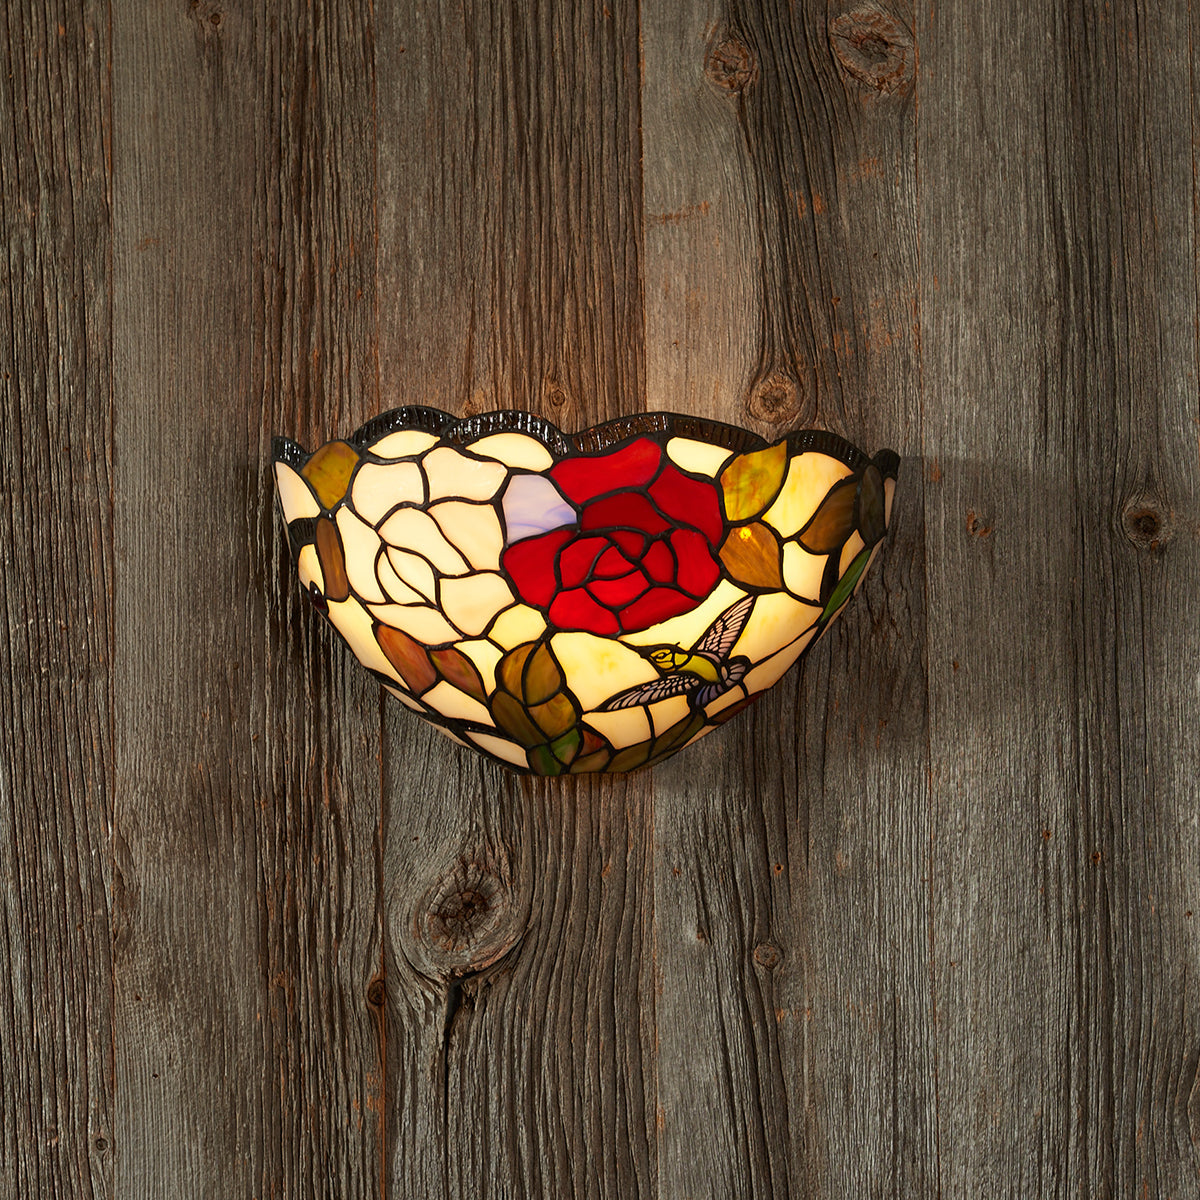 Tiffany Sconce - Rose and Leaves